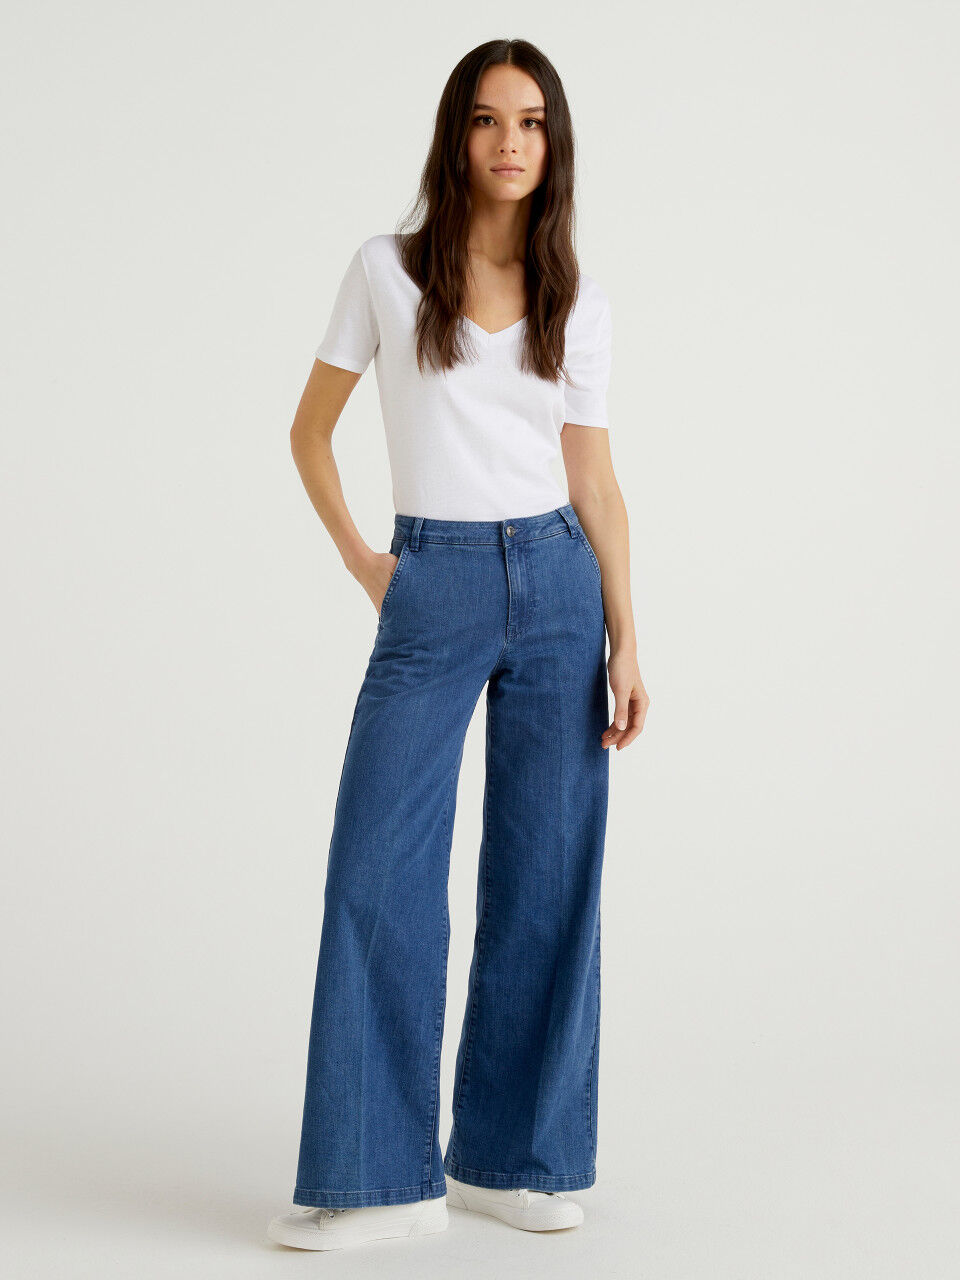 UNITED COLORS OF BENETTON Pantalone Jeans Fille